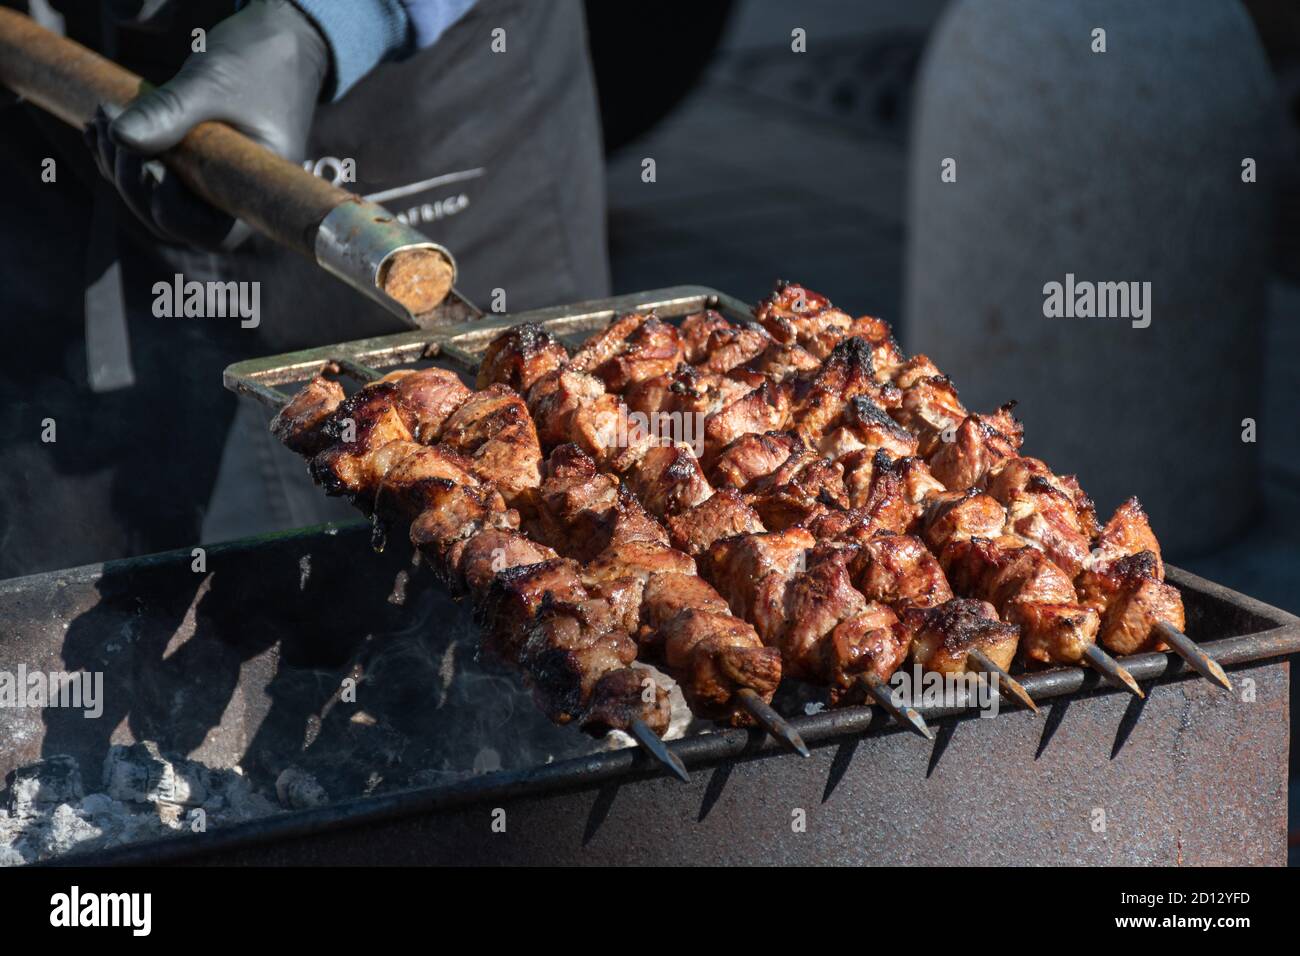 Close up of meat skewer, grilled in a barbecue, shashlik or shashlyk of pork for a picnic, man preparing and roasting with pitchforks Stock Photo